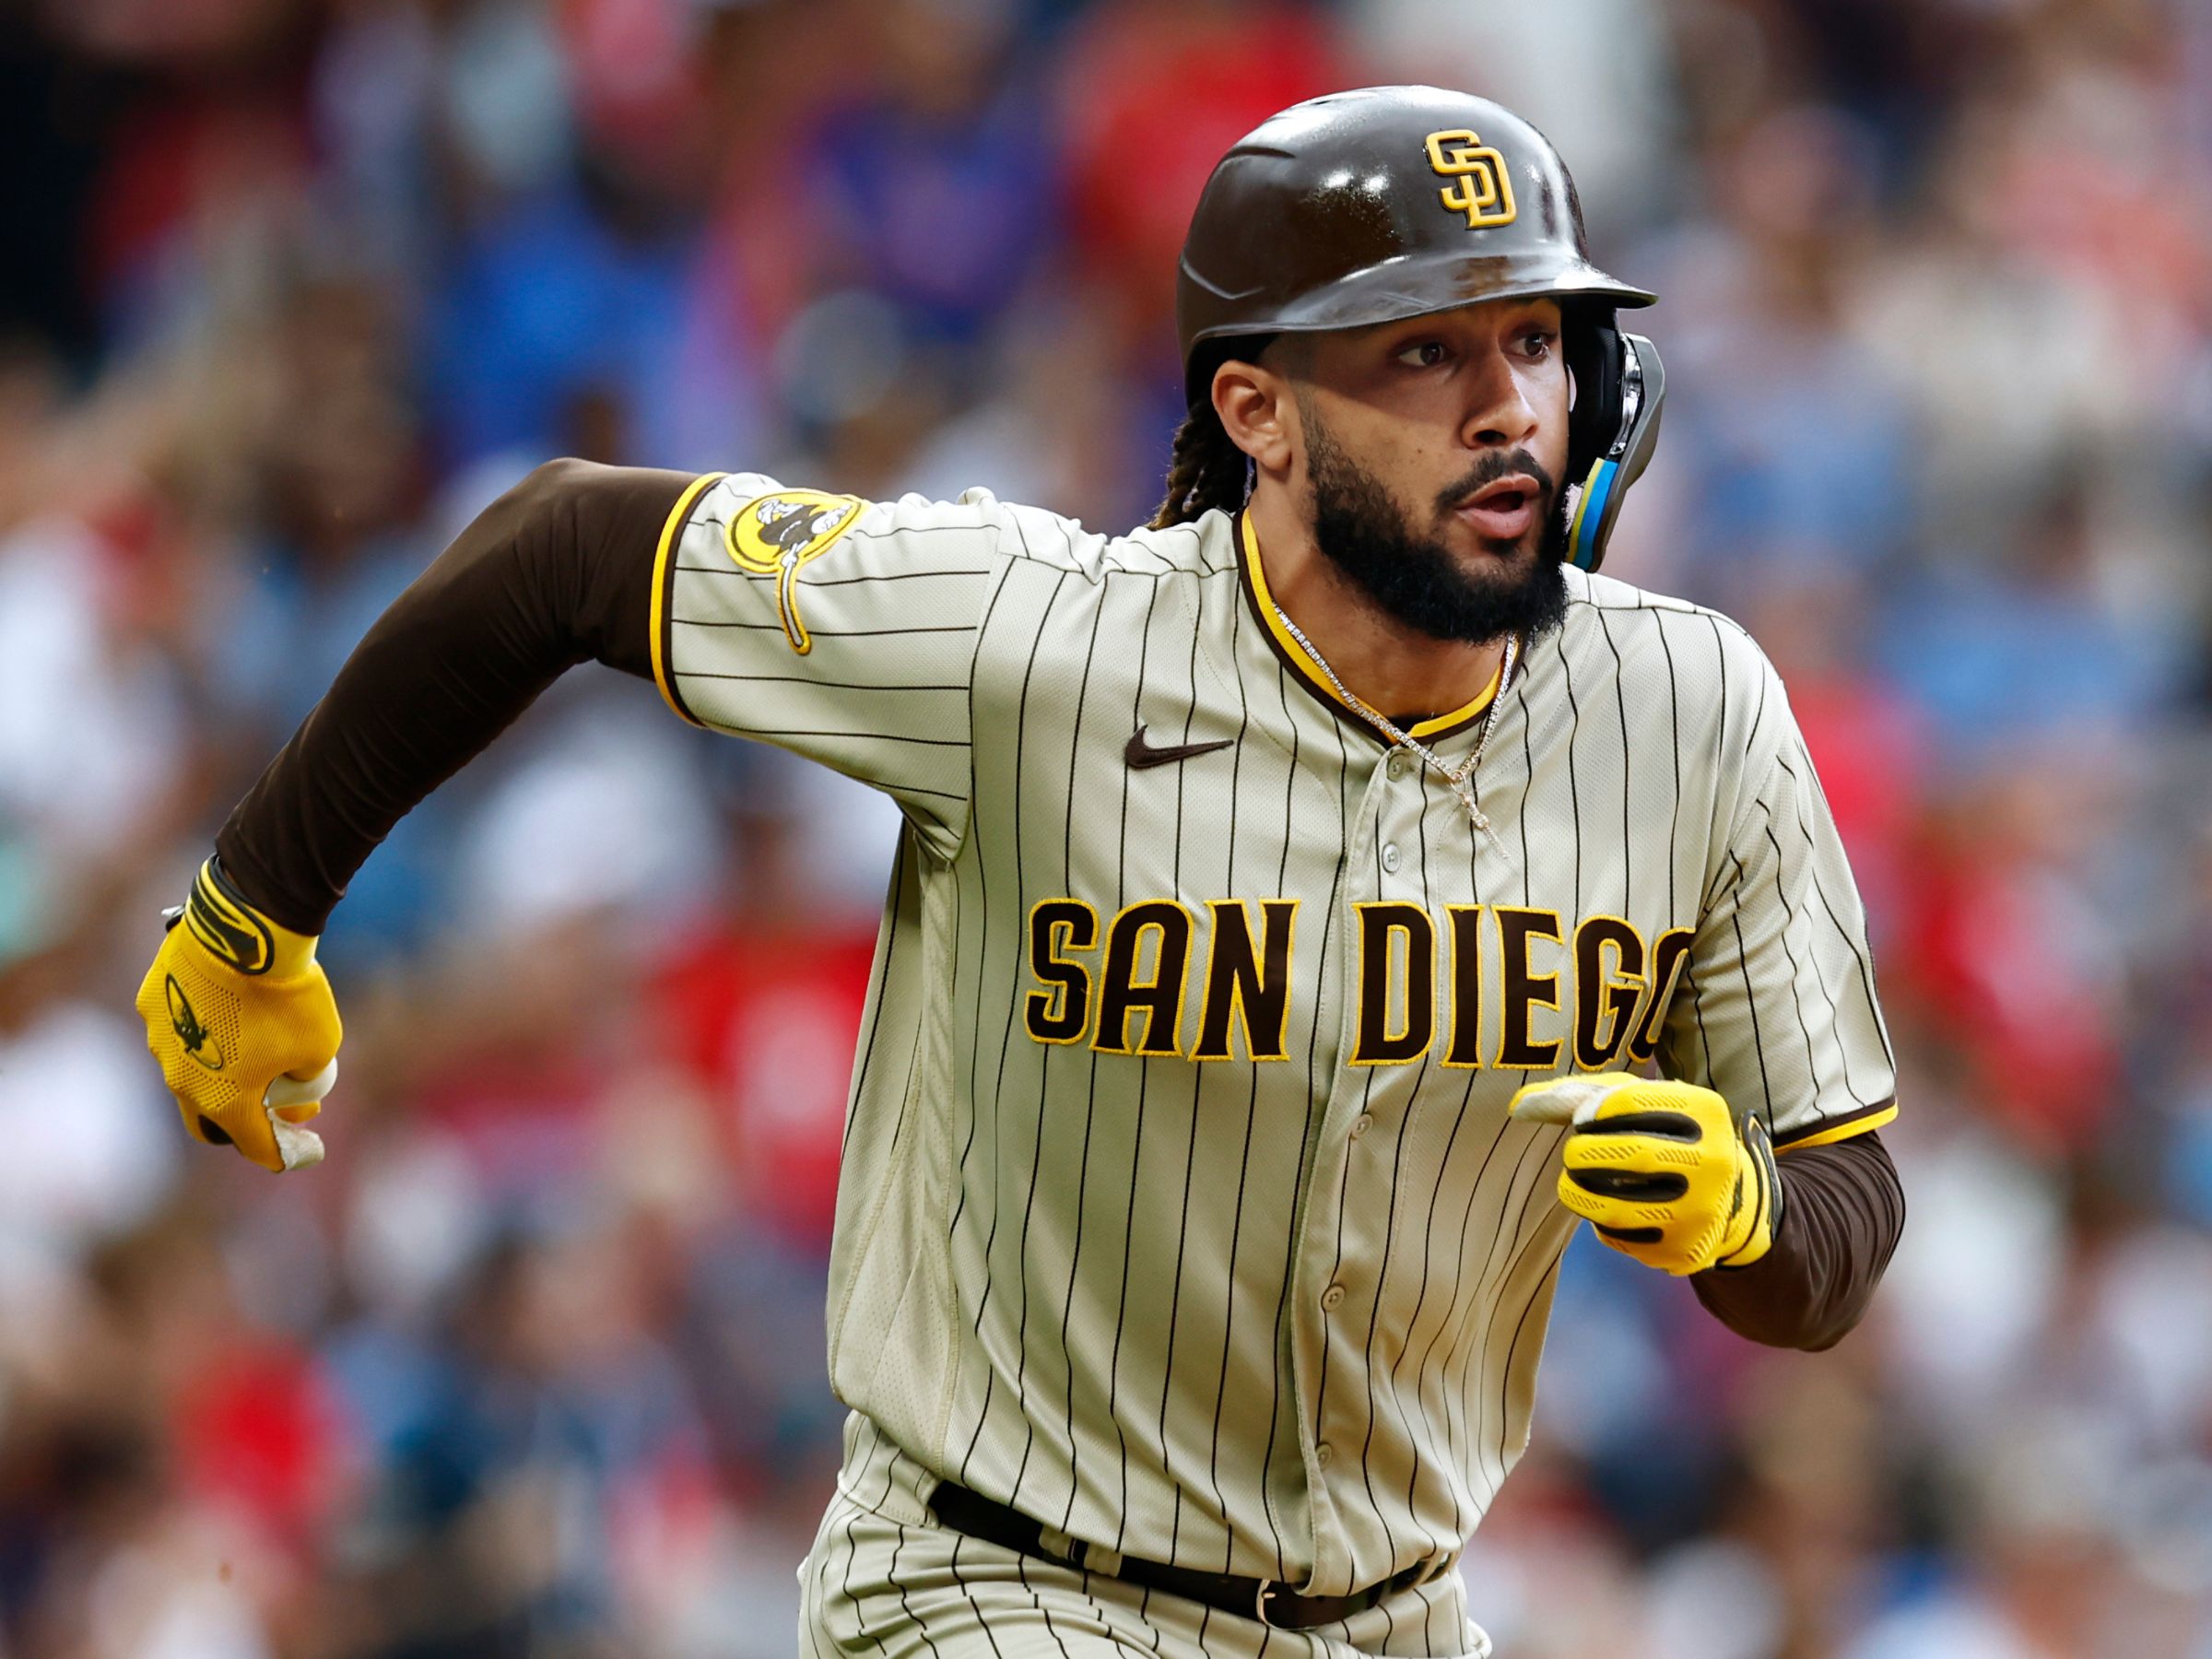 San Diego Padres: Fernando Tatis Jr And Others Return To Action